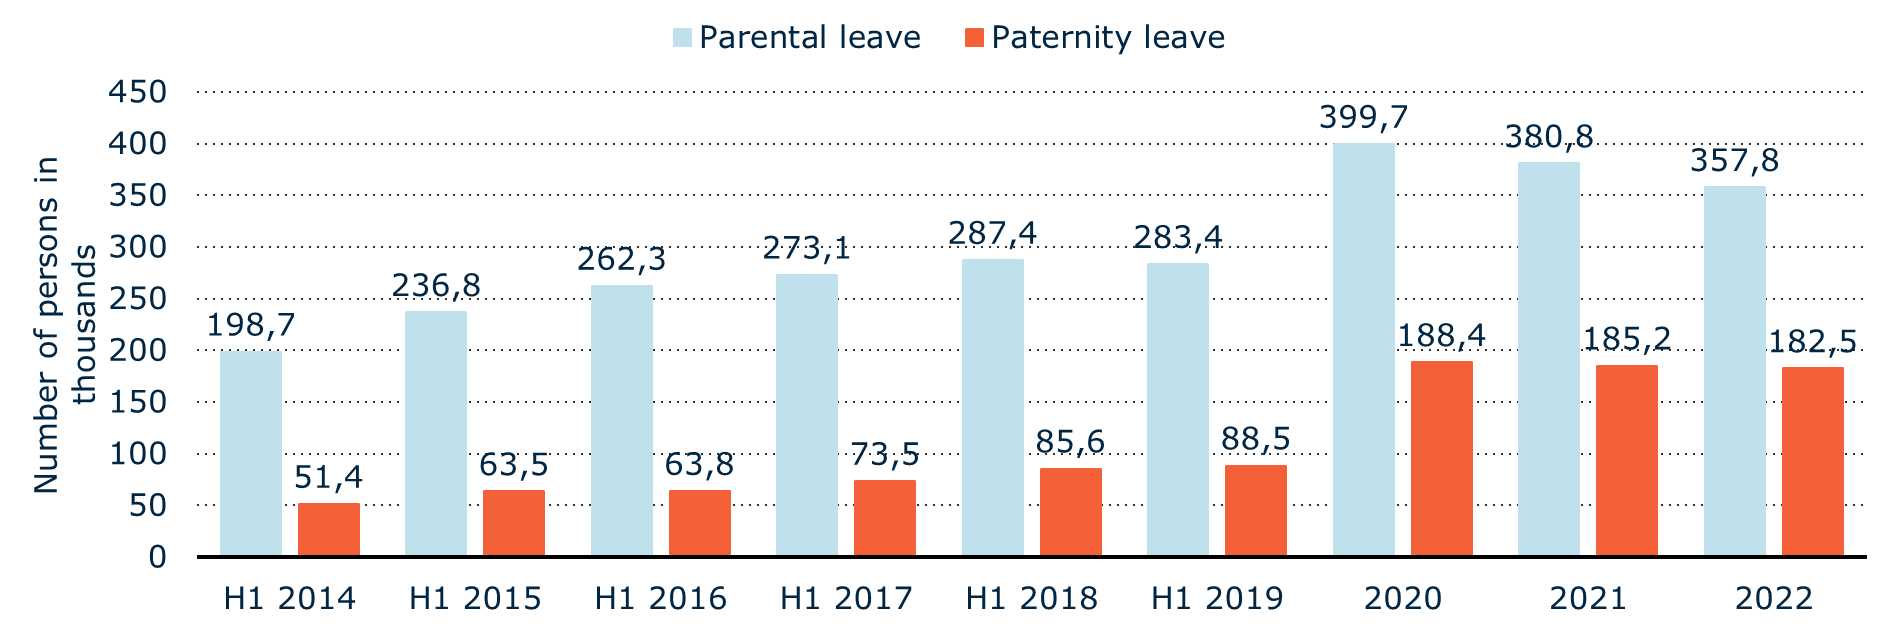 Partneity and Parental leave in Poland